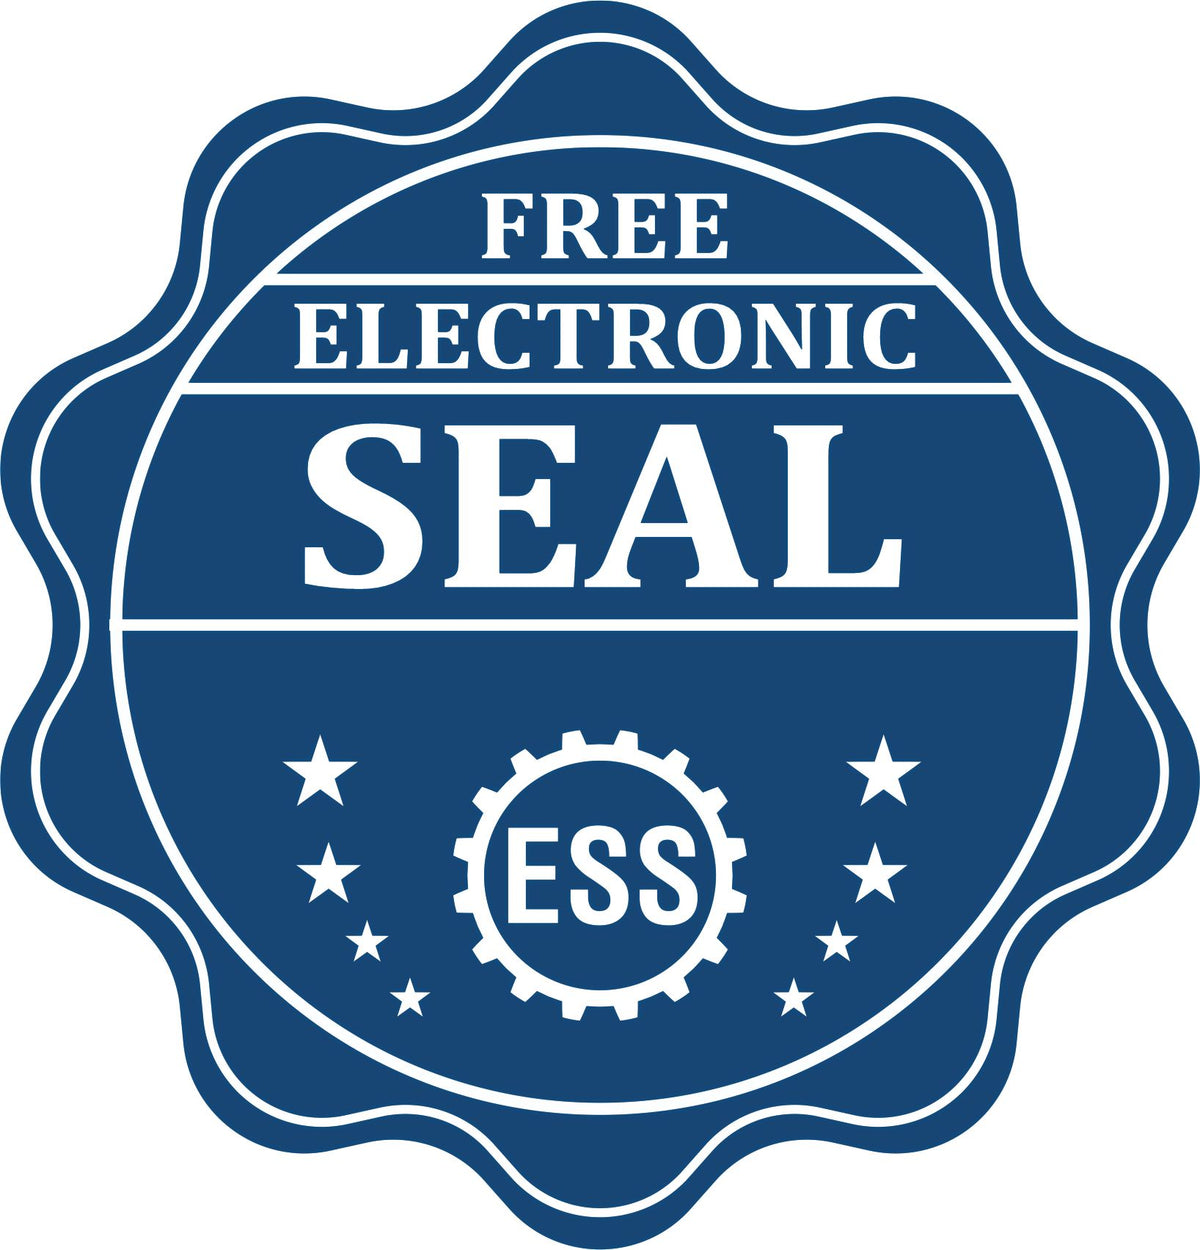 A badge showing a free electronic seal for the Hybrid Minnesota Land Surveyor Seal with stars and the ESS gear on the emblem.